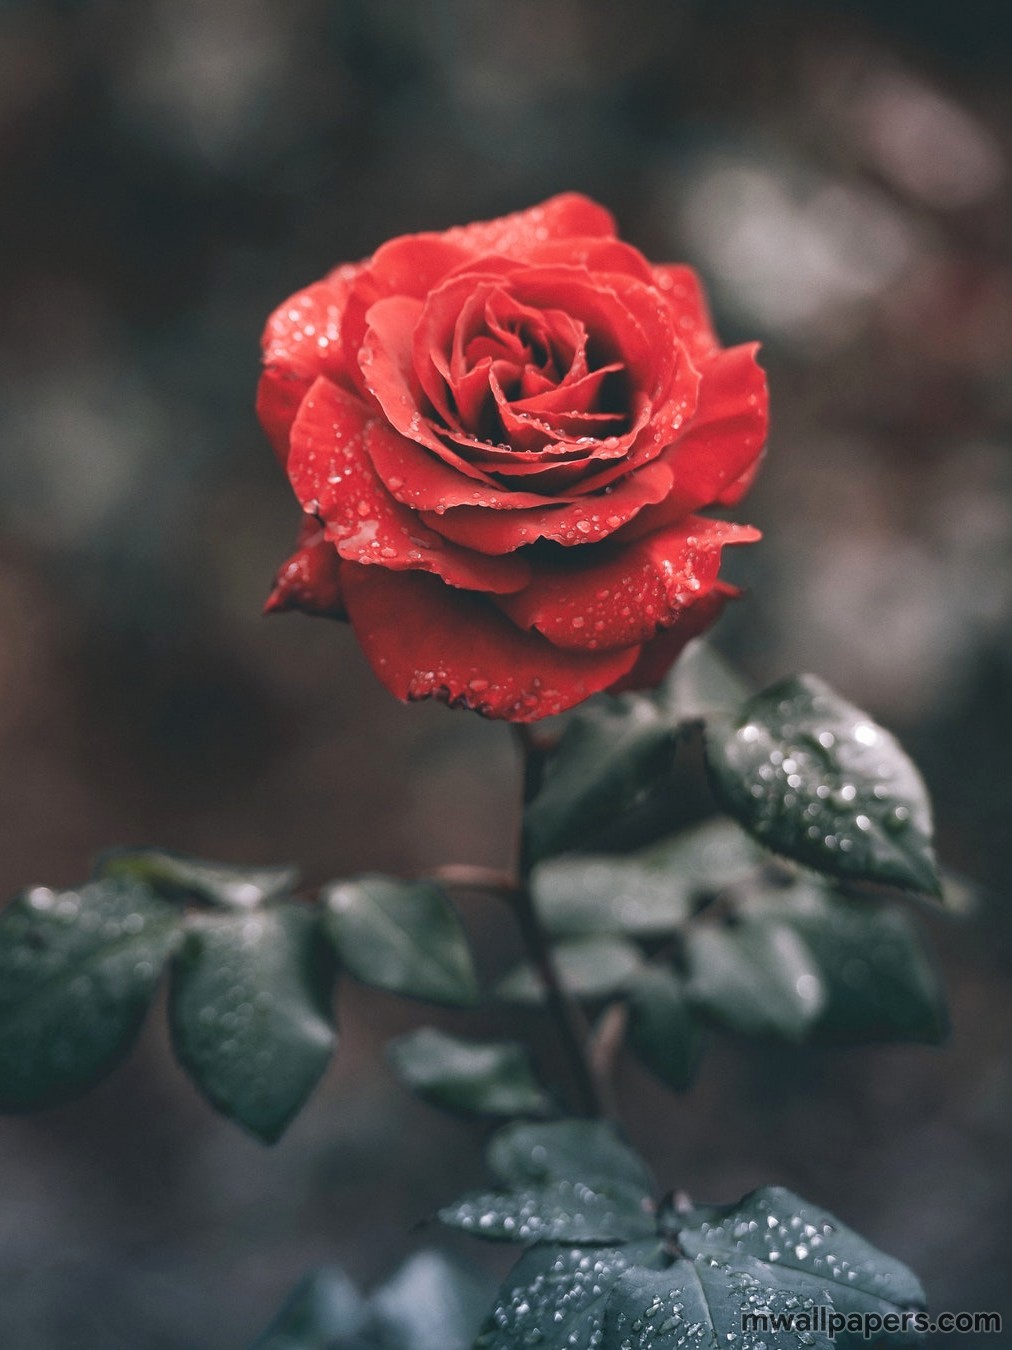 Download As Android Iphone Wallpaper Roses Are Beautiful